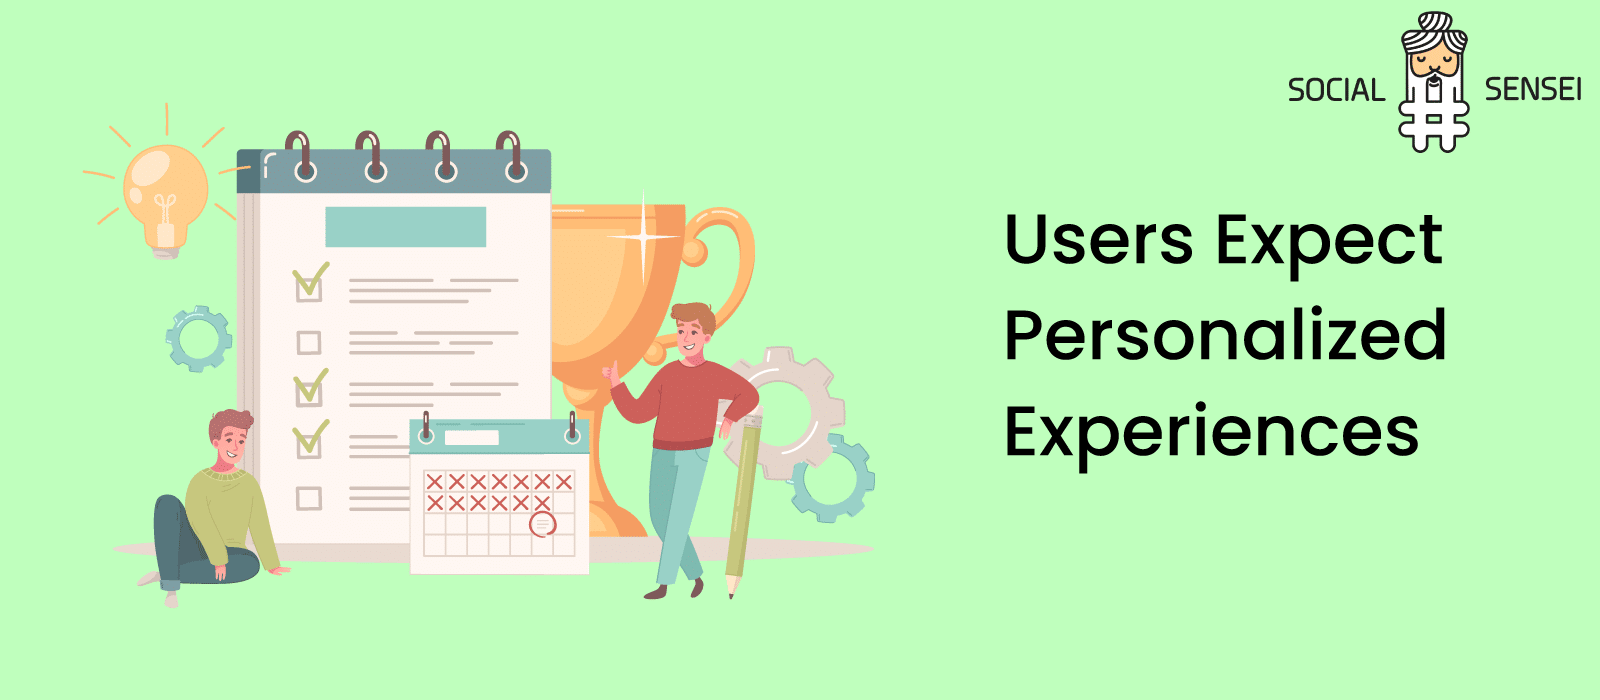 Users Expect Personalized Experiences